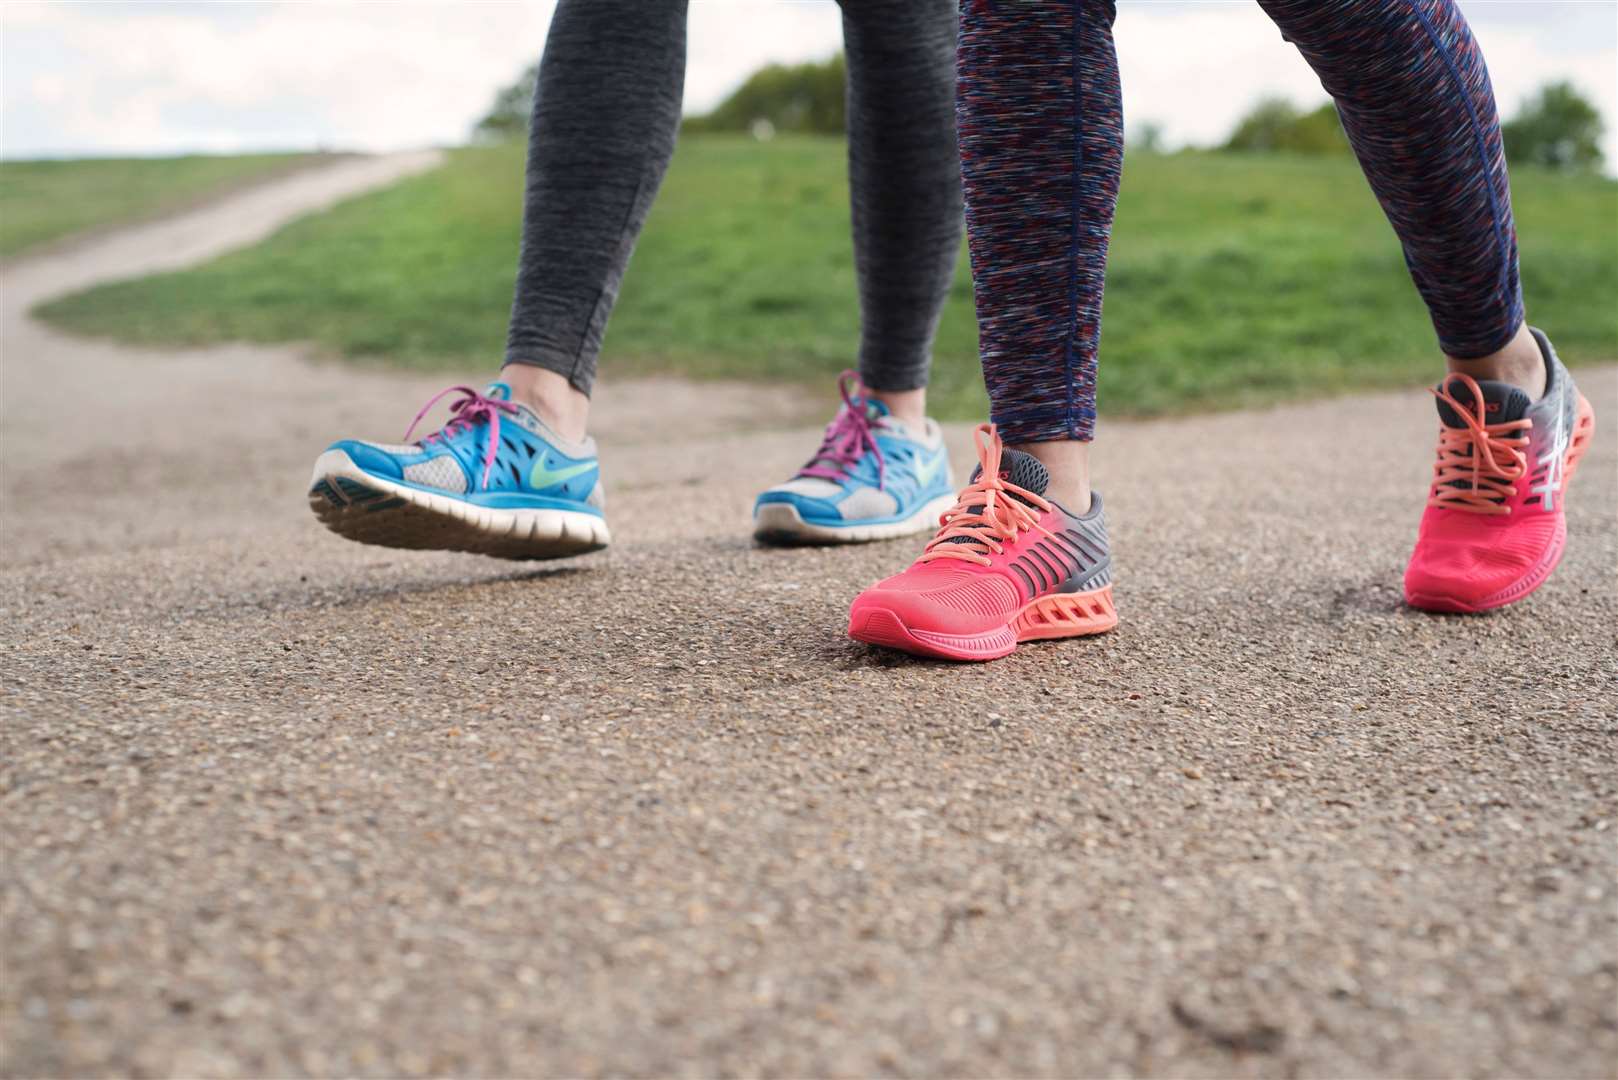 Cancer Research UK has challenged people to walk 10,000 steps every day in March.